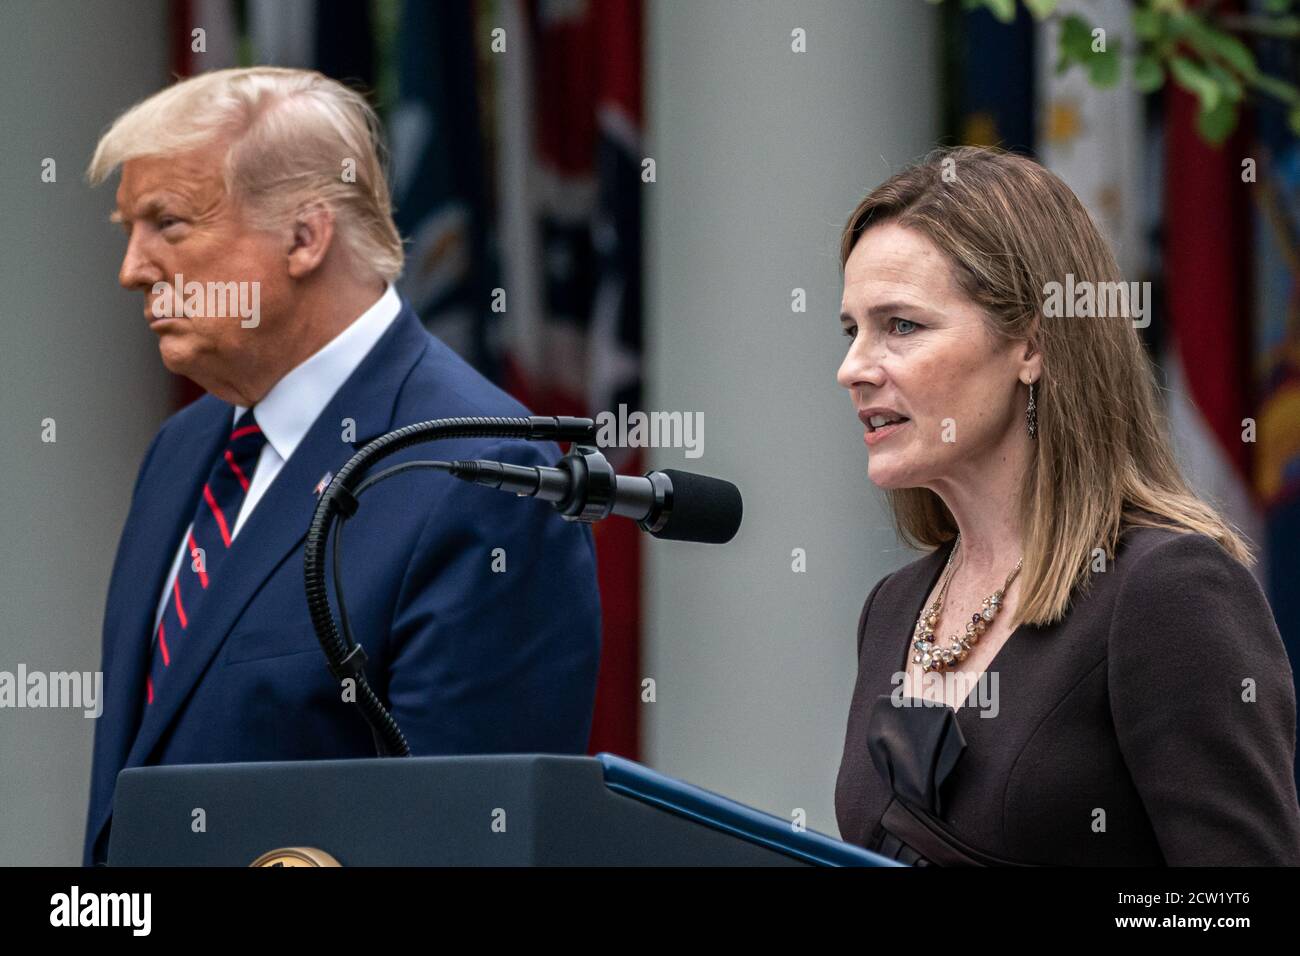 Judge Amy Coney Barrett, nominee for the Supreme Court seat left vacant by Justice Ruth Bader Ginsburg's death last week, speaks in the Rose Garden of the White House after President Donald Trump nominated her September 26, 2020 in Washington DC. The Republican-controlled Senate now has little time if they opt to confirm the nominee ahead of Election Day. (Photo by Photo Ken Cedeno/Sipa USA ) Credit: Sipa USA/Alamy Live News Stock Photo